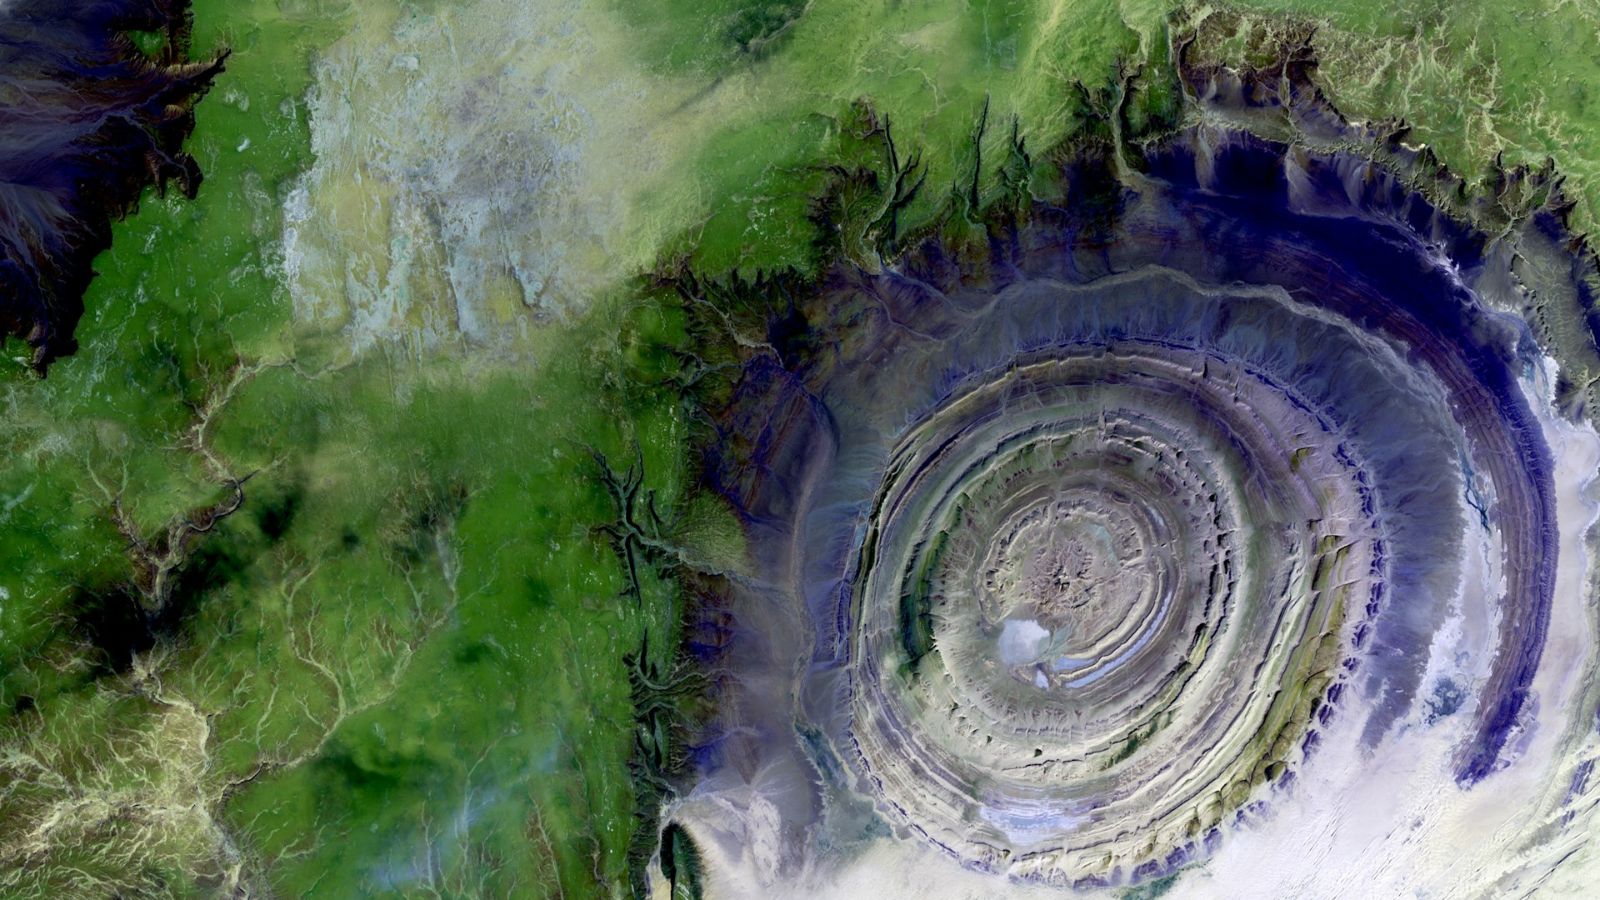 <p>Also known as the Eye of the Sahara, this prominent circular feature in the Sahara Desert has puzzled observers and given rise to various geological and conspiracy theories.</p>